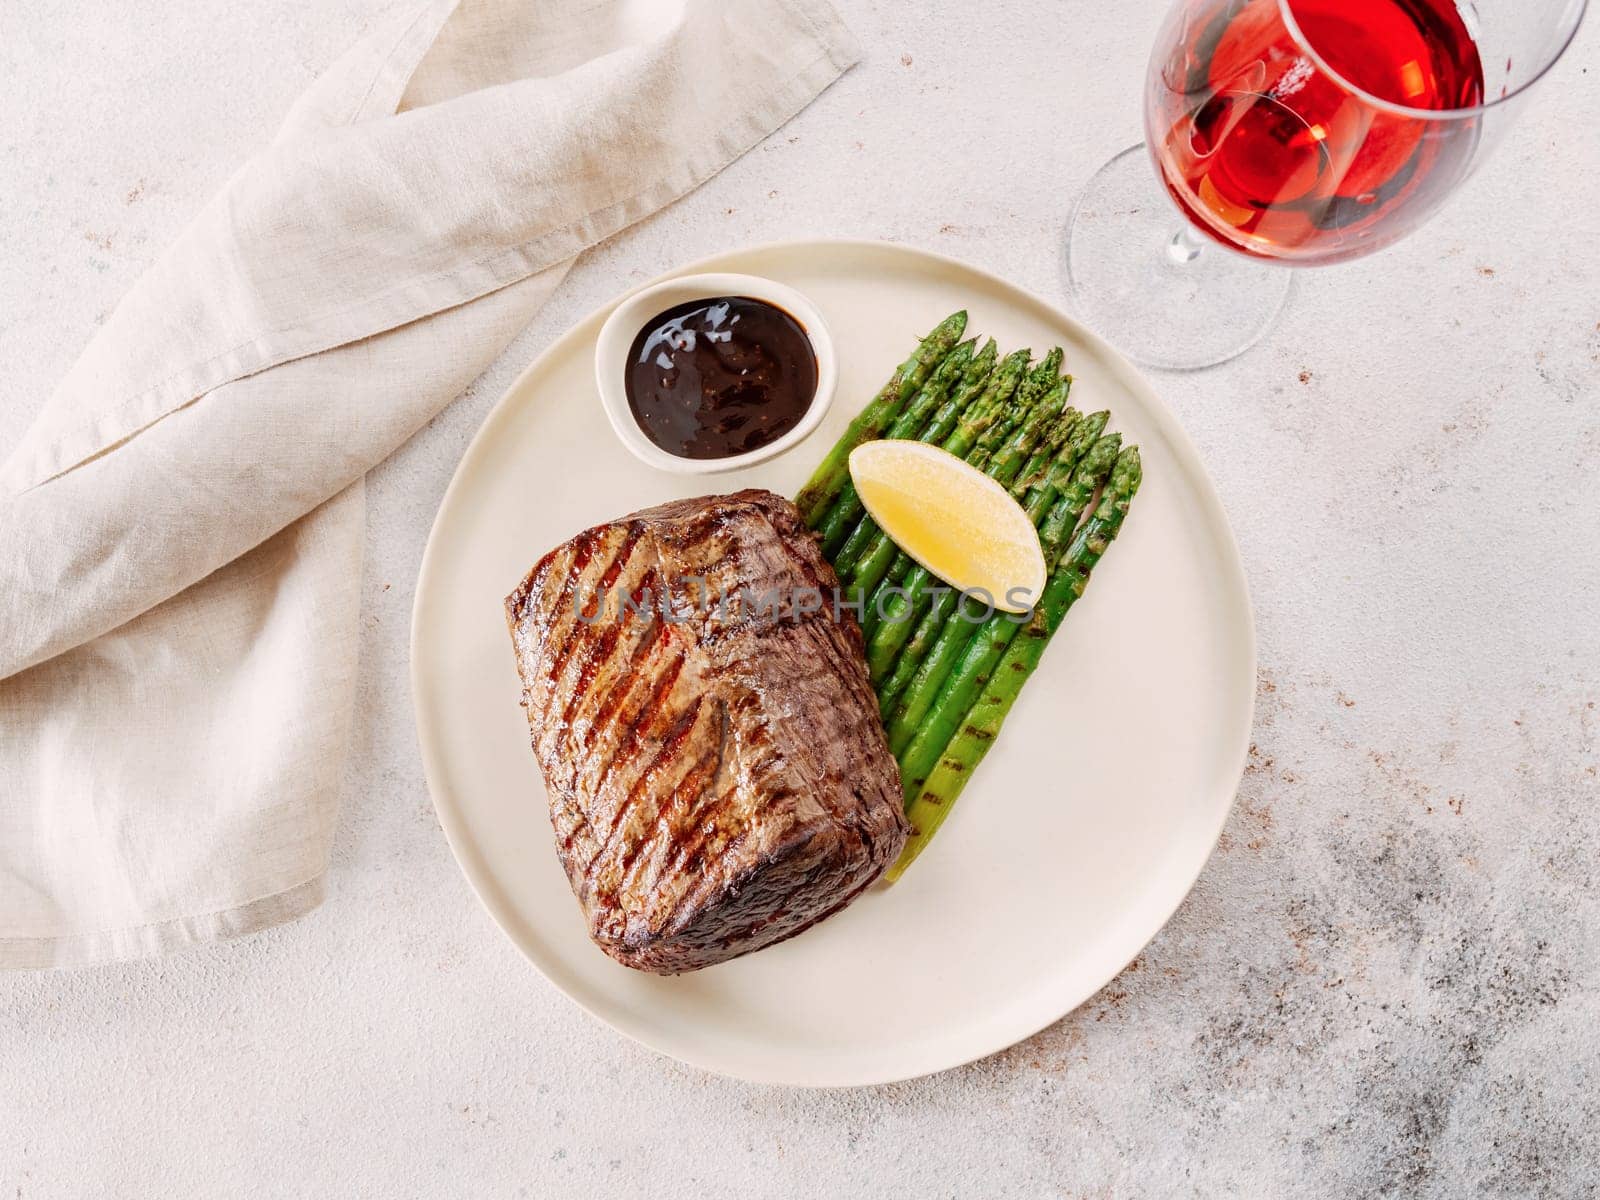 Grilled meat steak on plate with lemon and asparagus on white table background. Food and cuisine concept. Restaurant-style plating, with red wine glass on table. Top view or flat lay